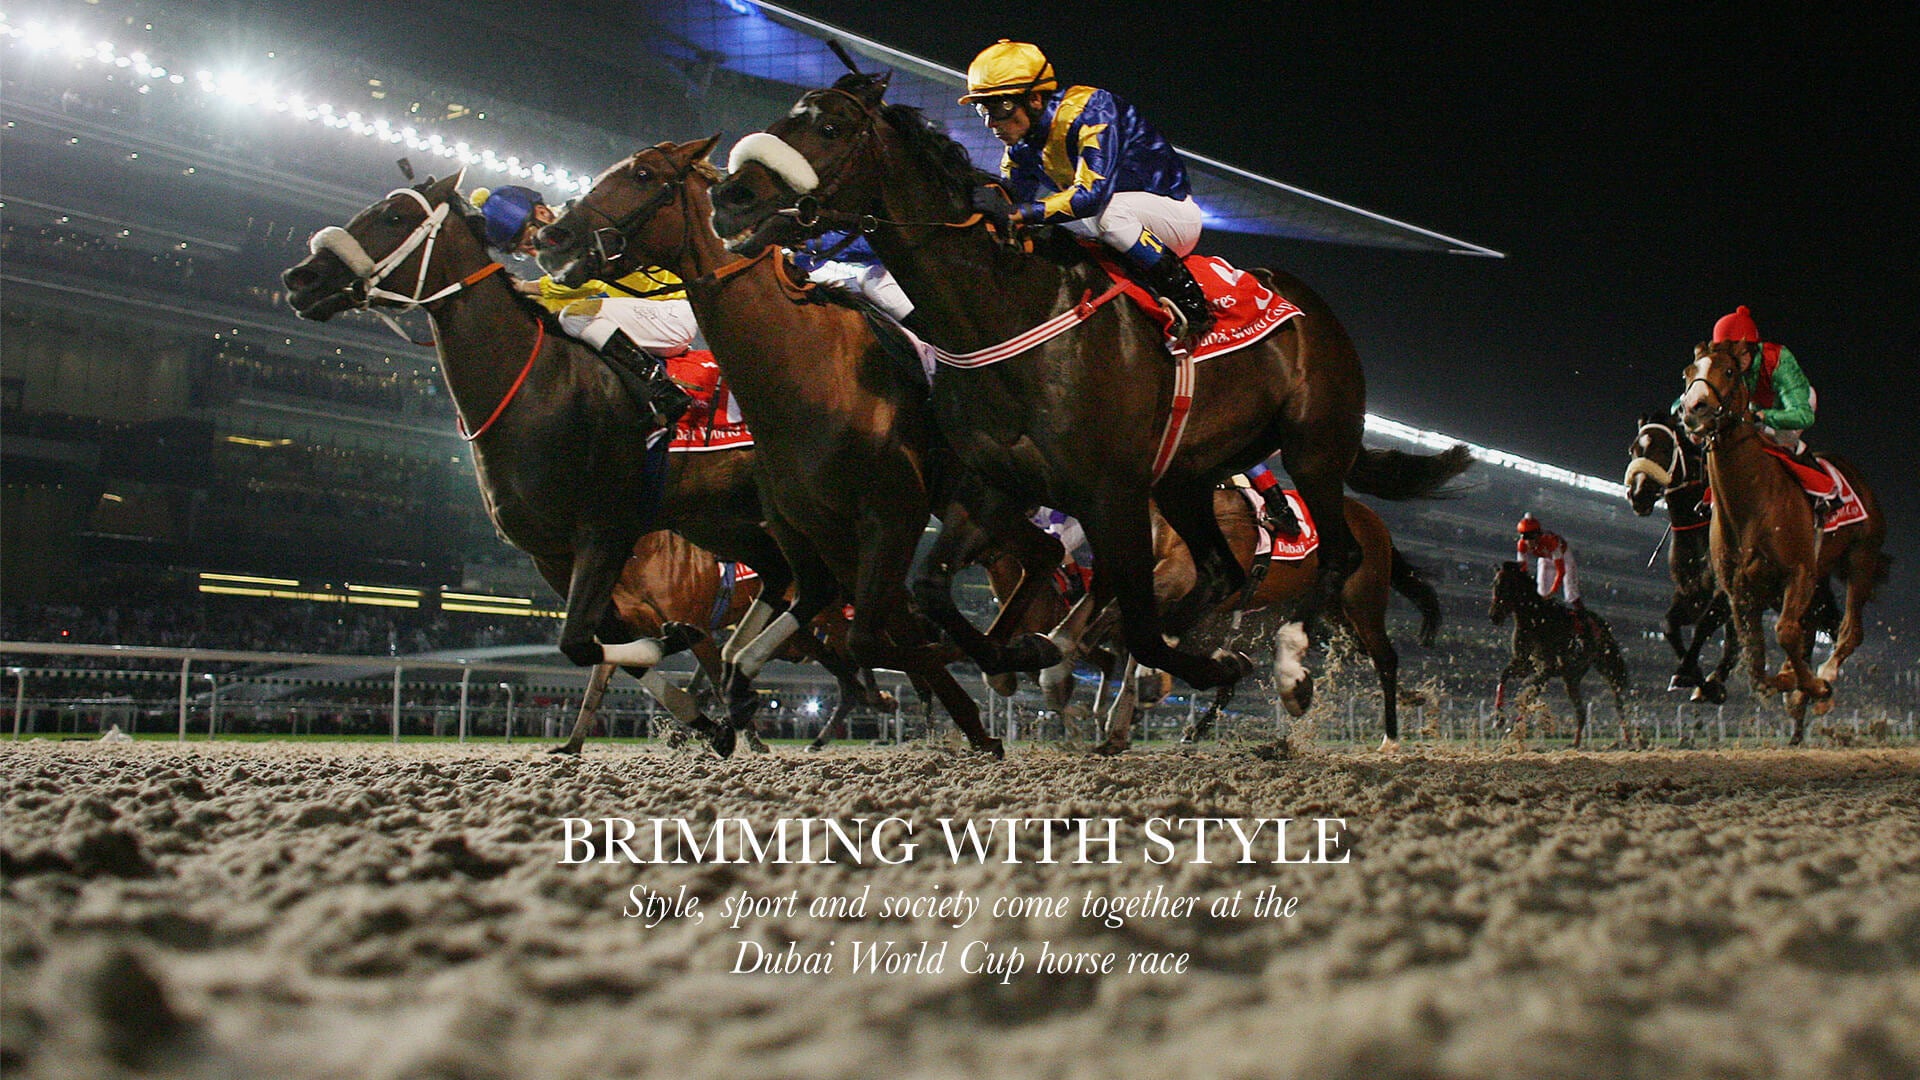 Brimming With Style – Style, sport and society come together at the Dubai World Cup horse race